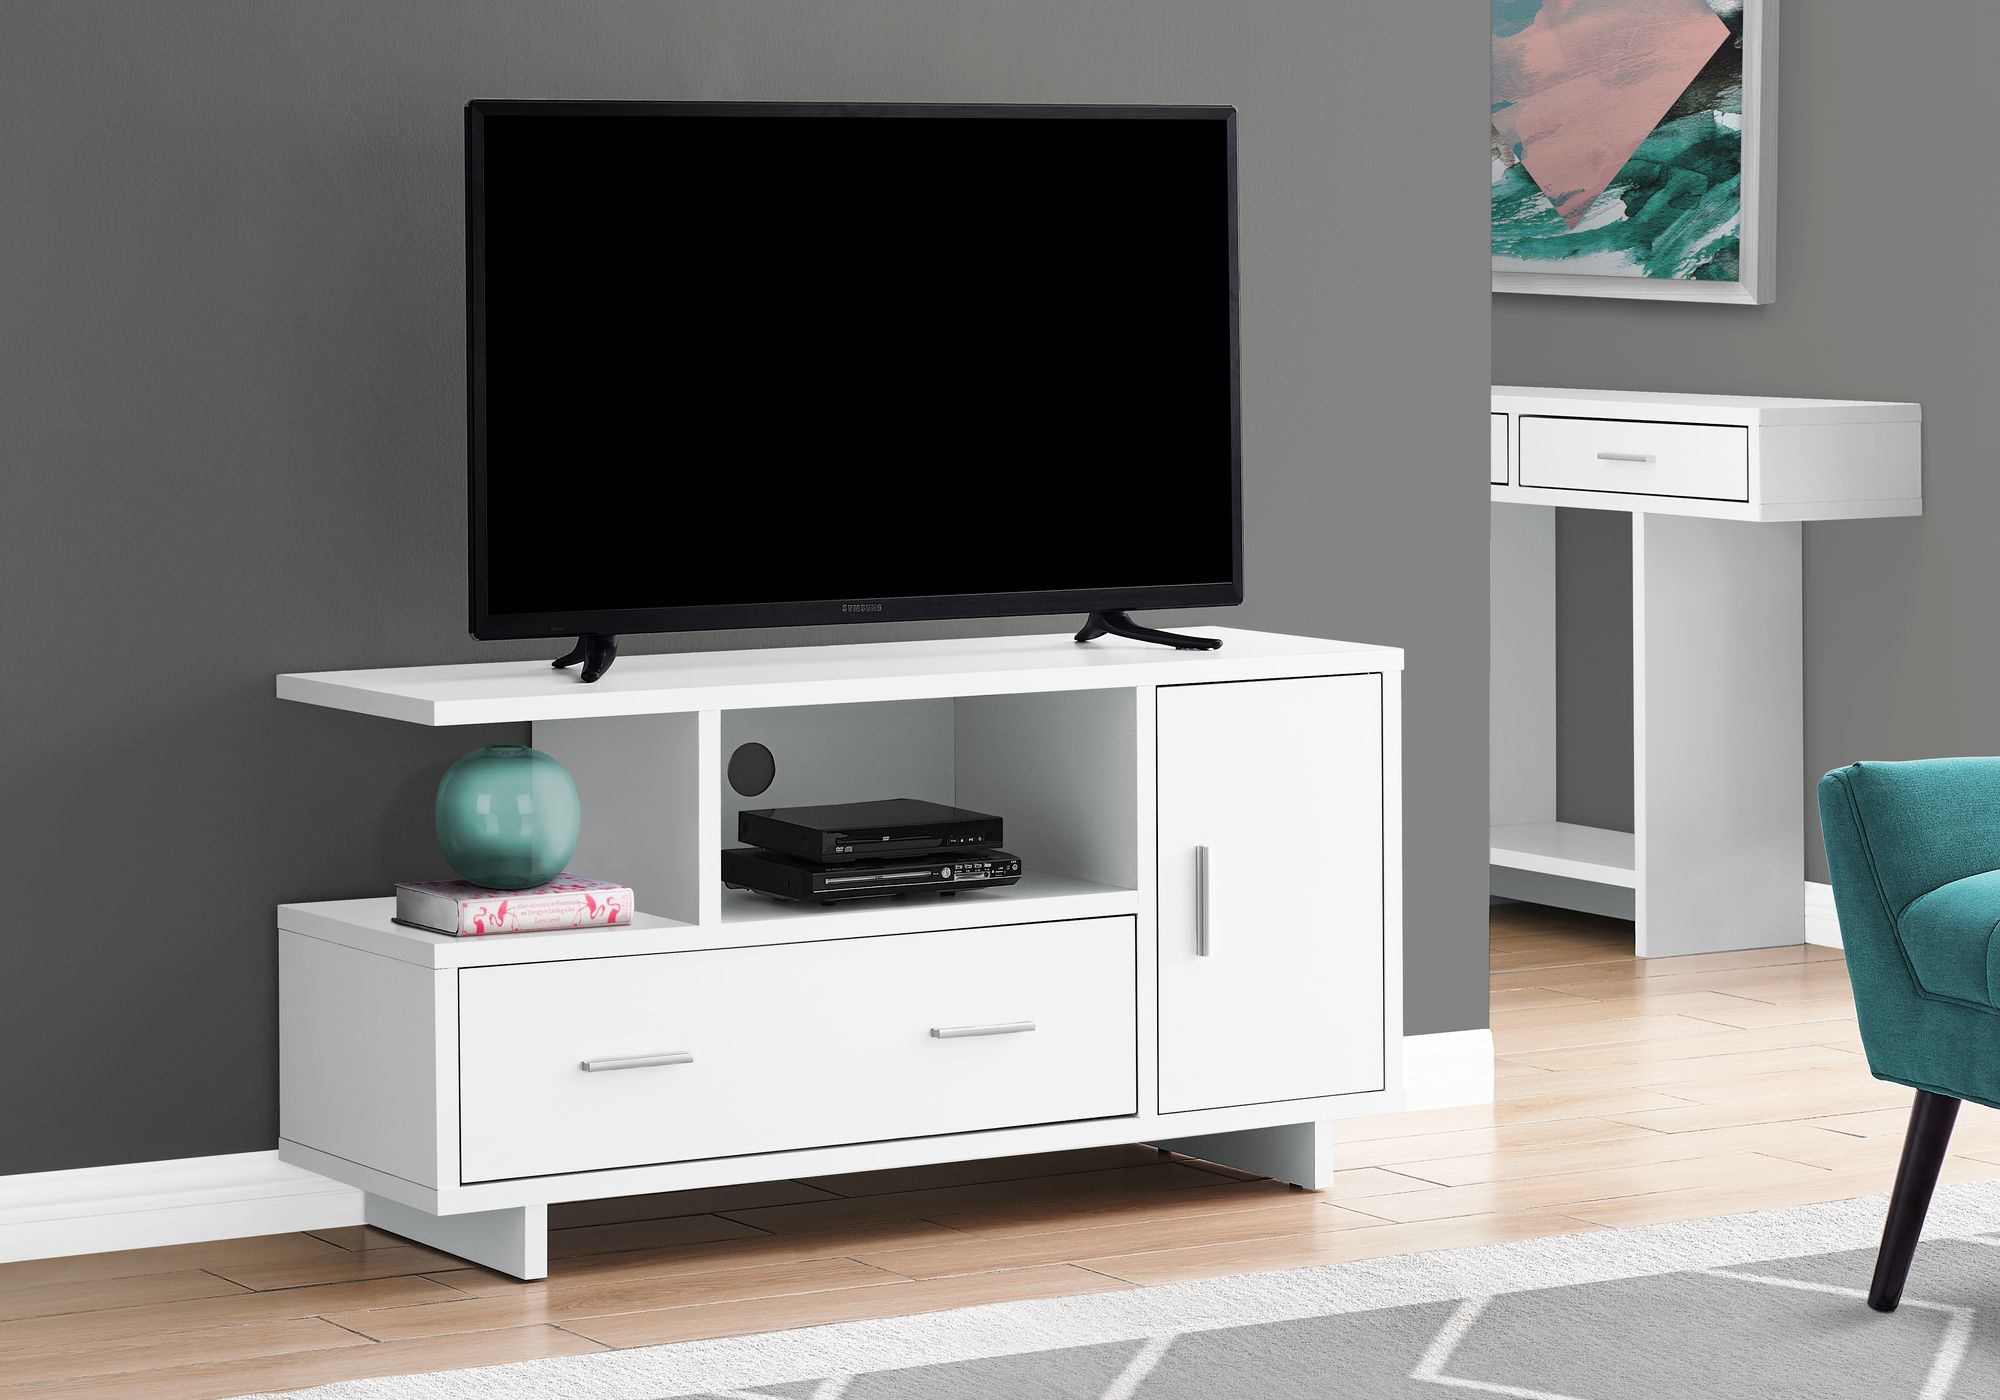 I 2800 - TV STAND - 48"L / WHITE WITH STORAGE BY MONARCH SPECIALTIES INC